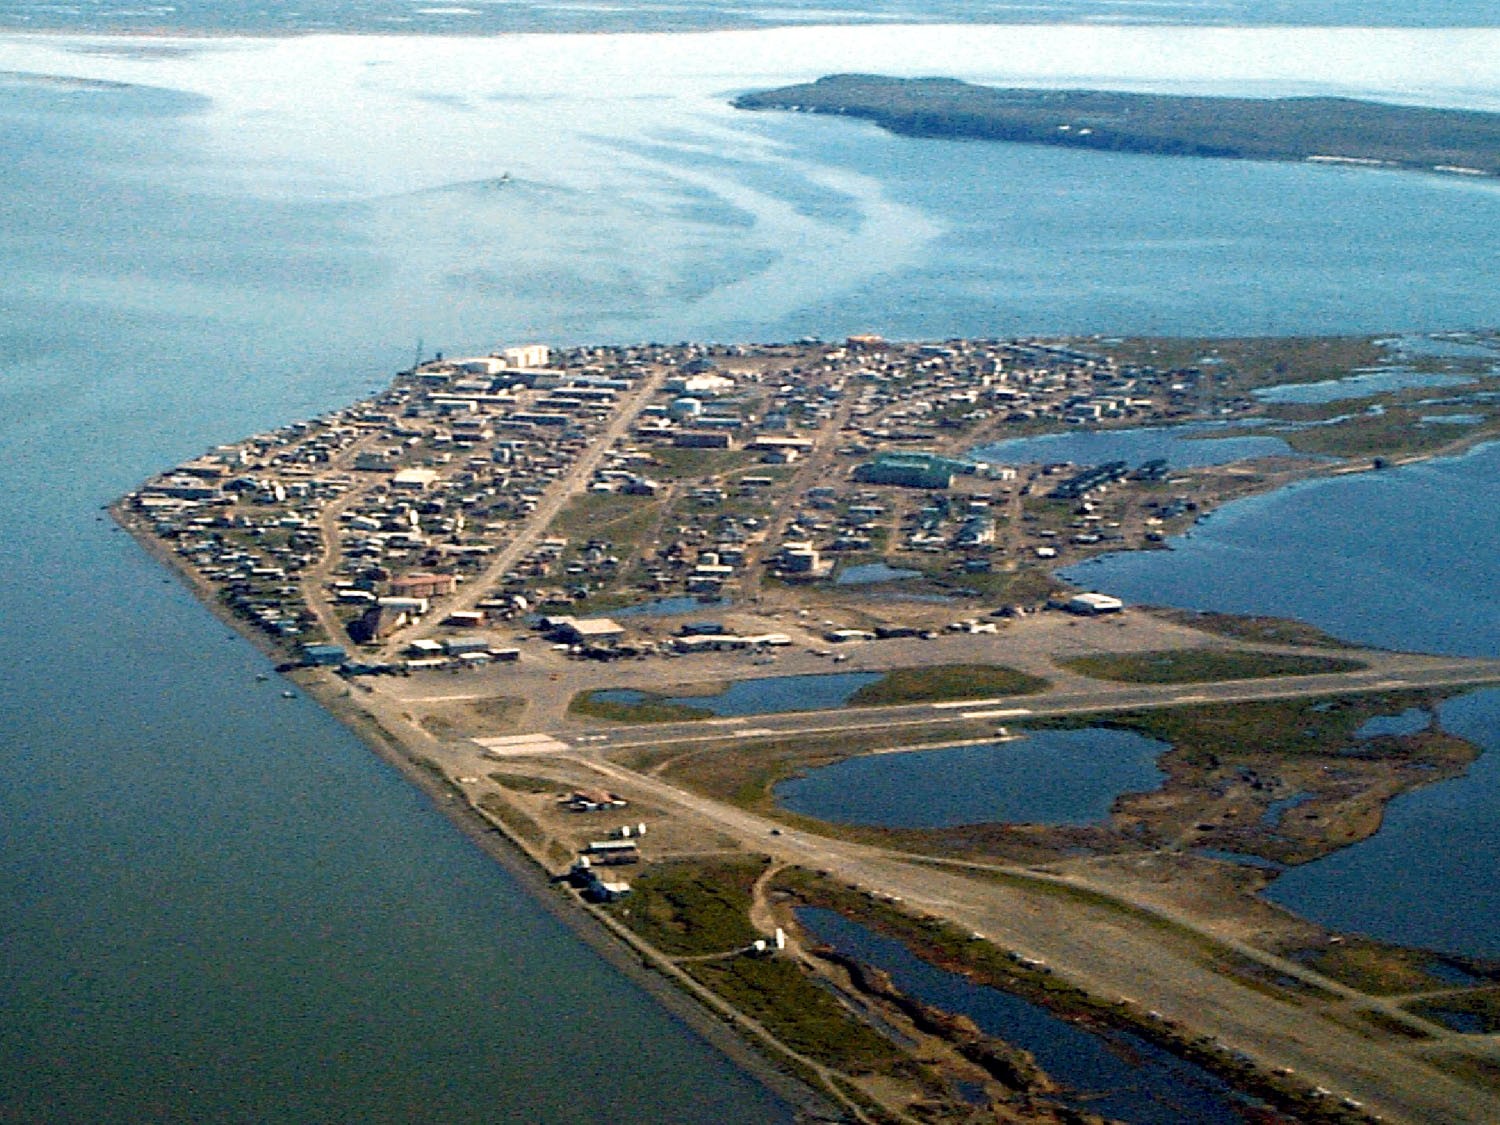 The Native Village of Kotzebue is at the tip of a peninsula in Kotzebue Sound, just above the Arctic Circle. Photo: U.S. Army Corps of Engineers